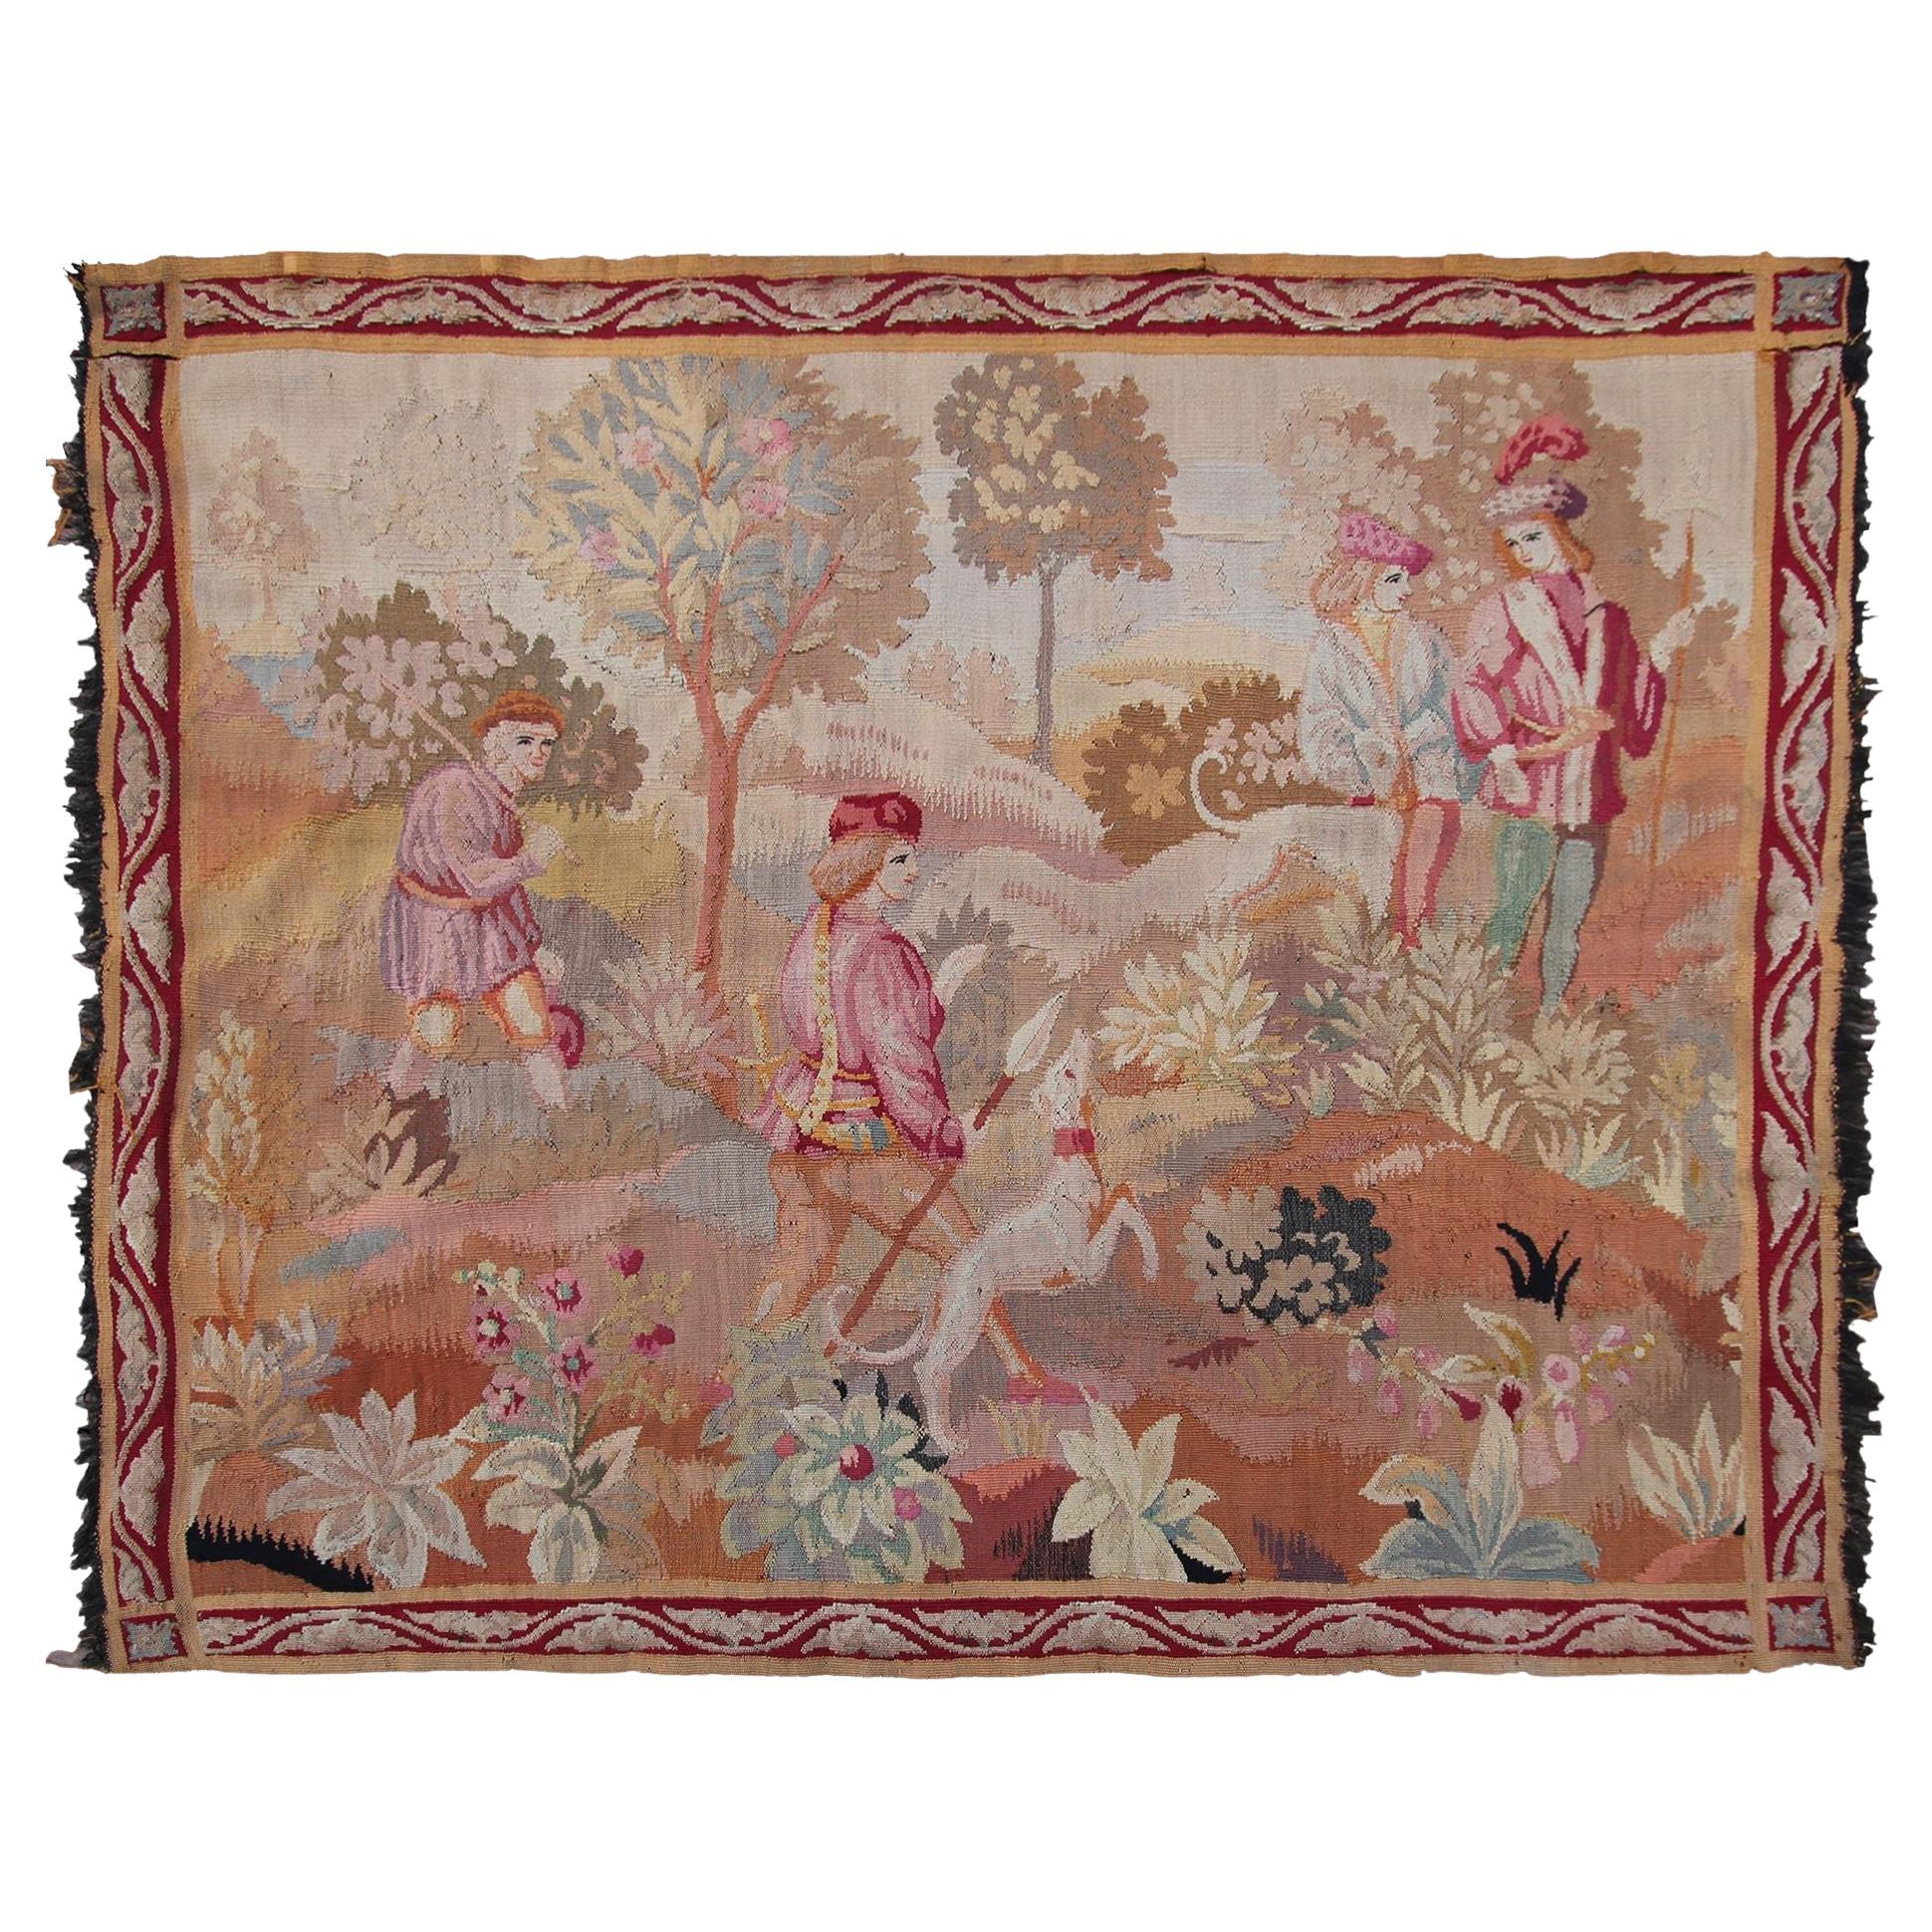 Antique French Tapestry Antique Tapestry Handmade Tapestry Verdure Tapestry